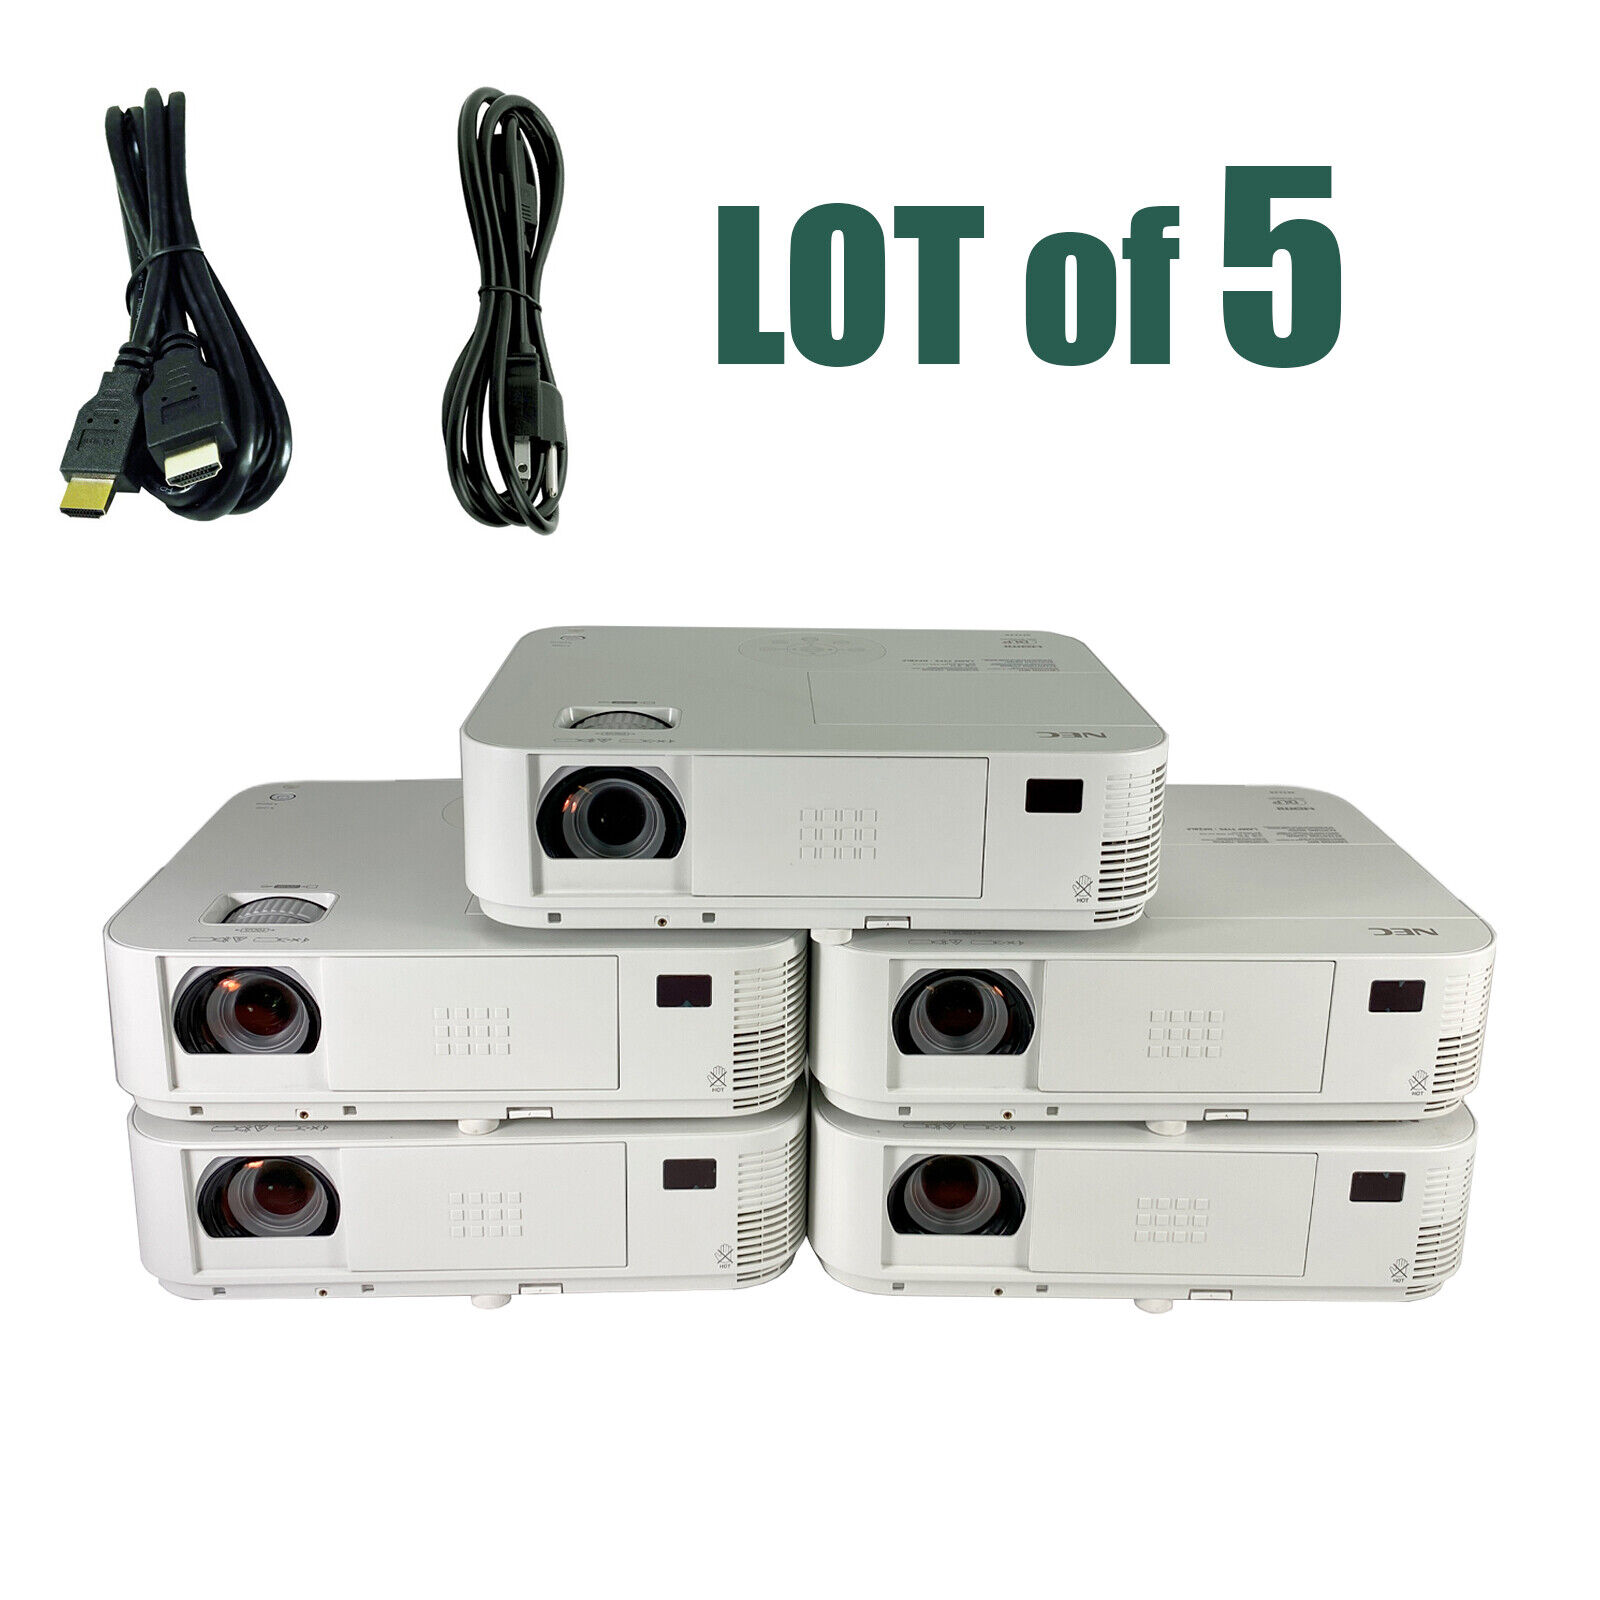 Lot of 5 - NEC NP-M322X Projector 3200 ANSI 2HDMI 1080p w/Power & HDMI Cable NEC NEC NP-M322X